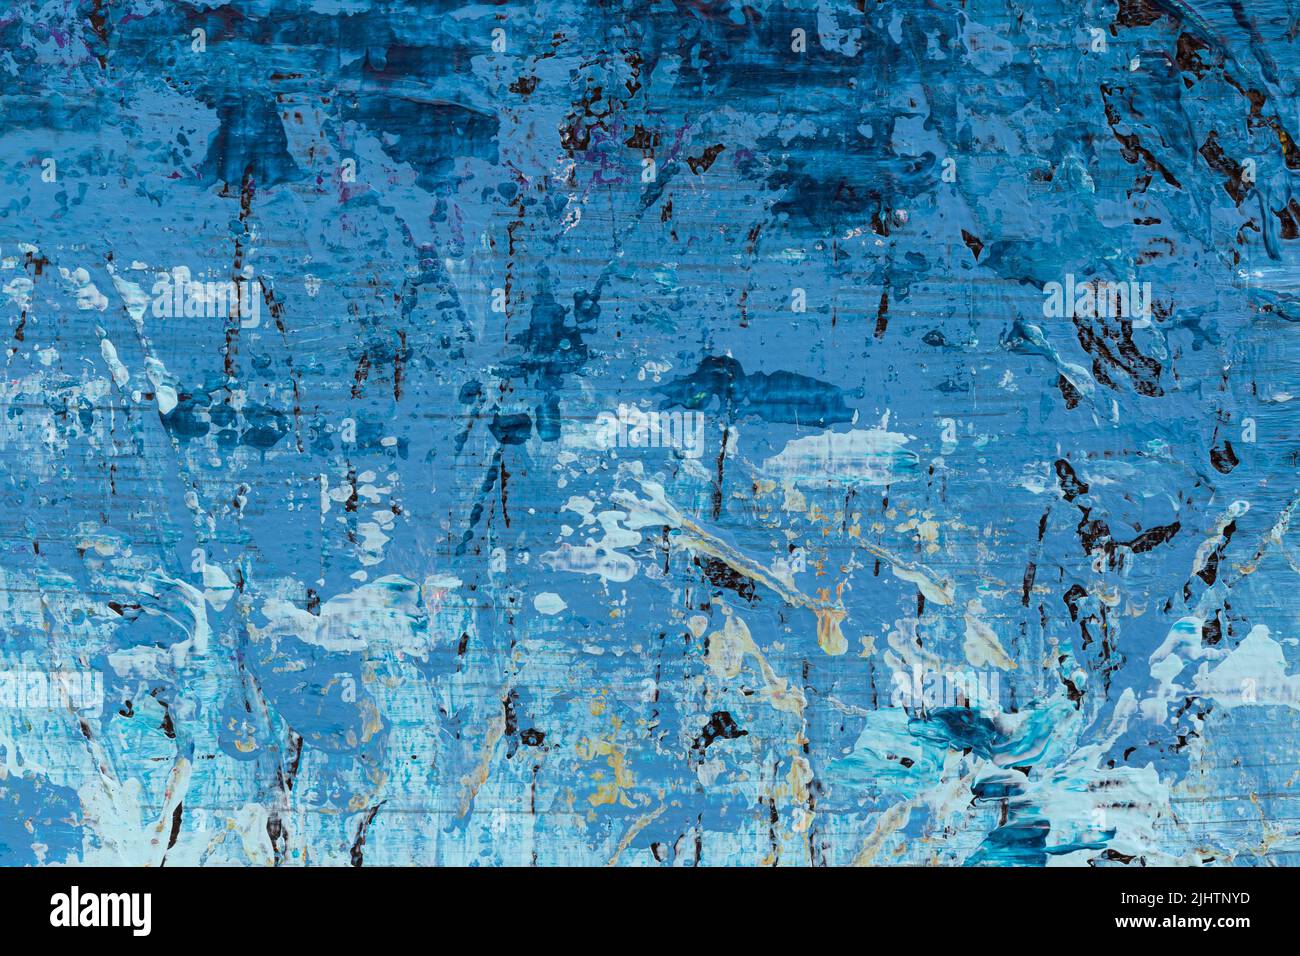 Macro close-up of an abstract blue, white and black acrylic paint background. High resolution full frame textured messy canvas background. Stock Photo